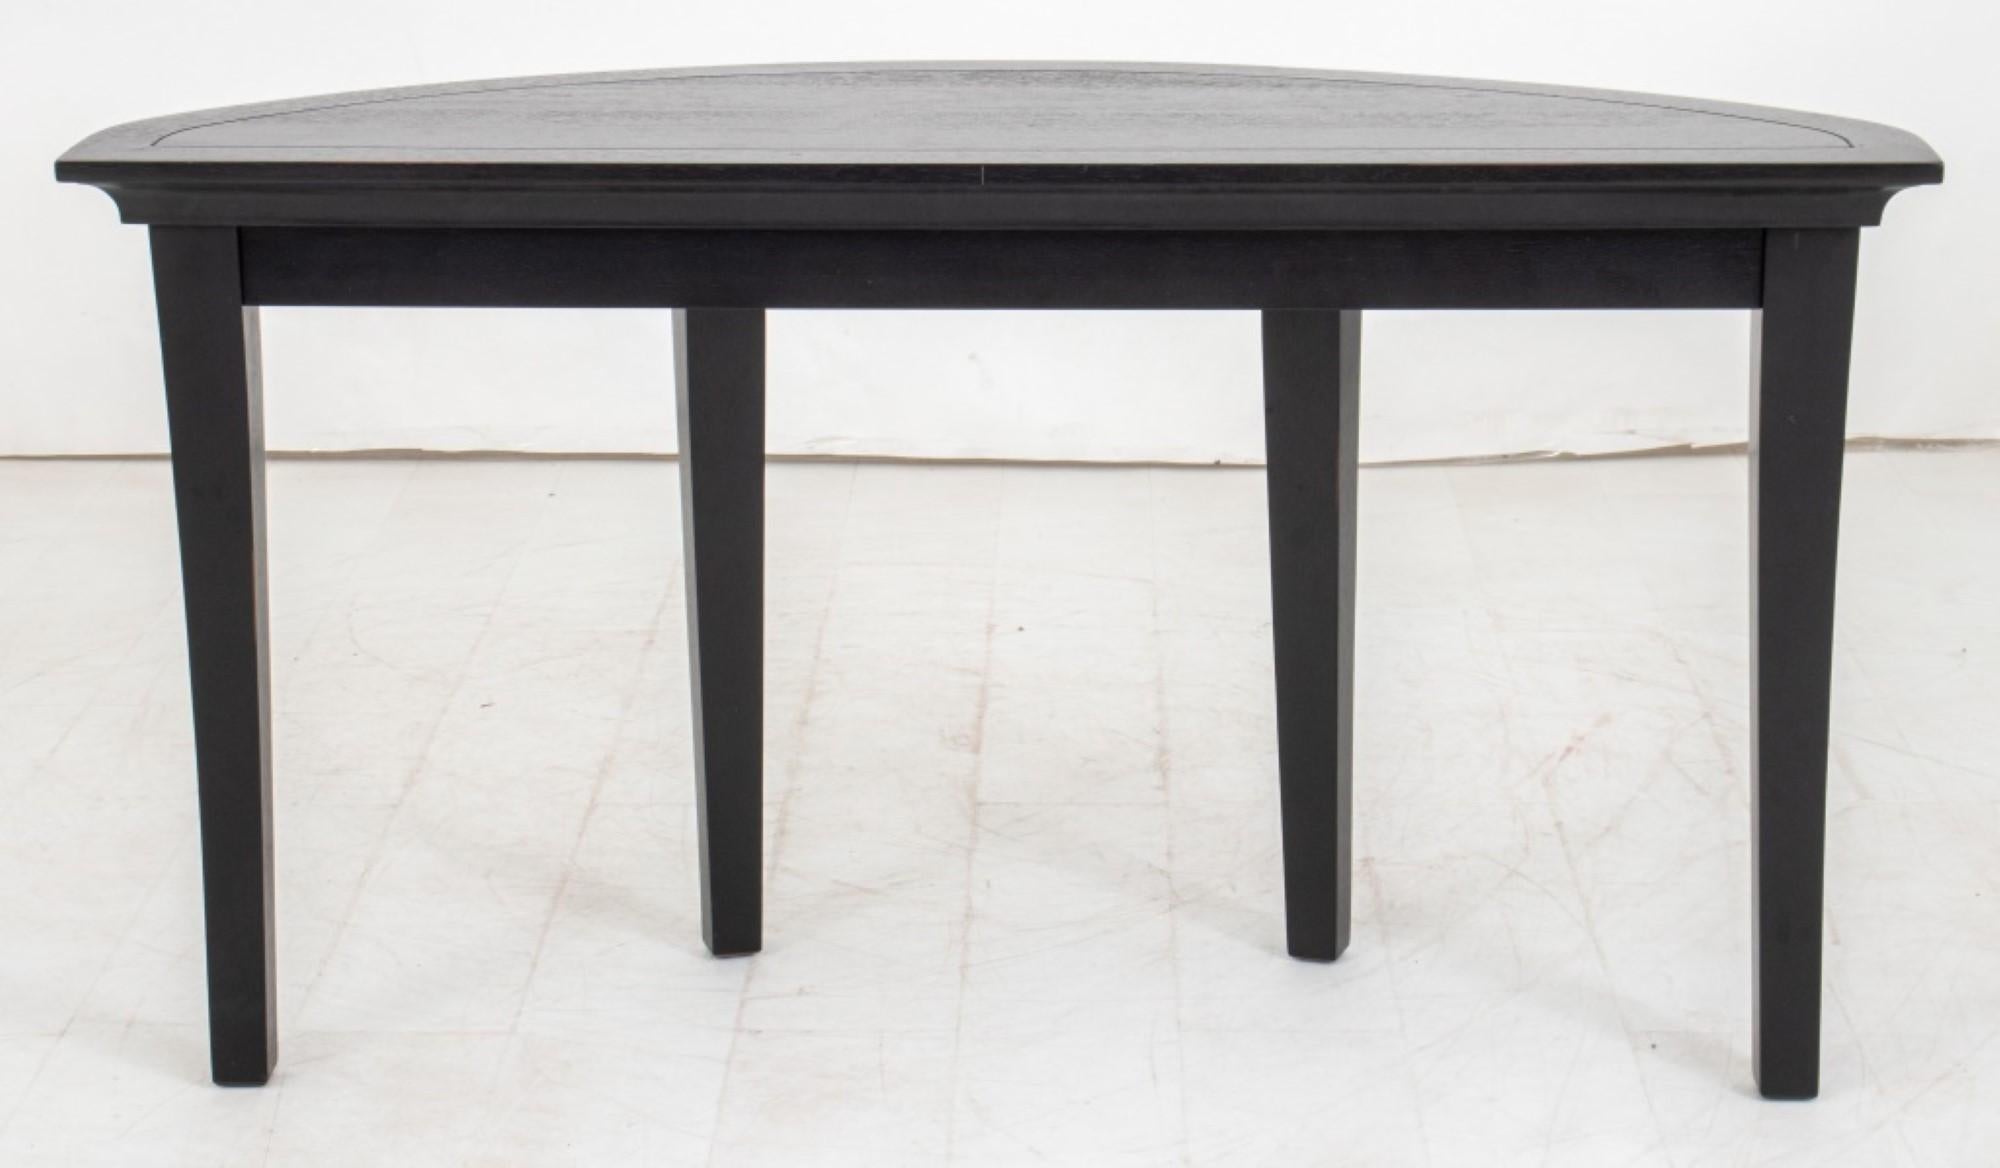 Modern Ebonized Wood Demilune Table. Provenance: From the 50 East 89th Street estate of a 20th-century photography collector.

Dealer: S138XX